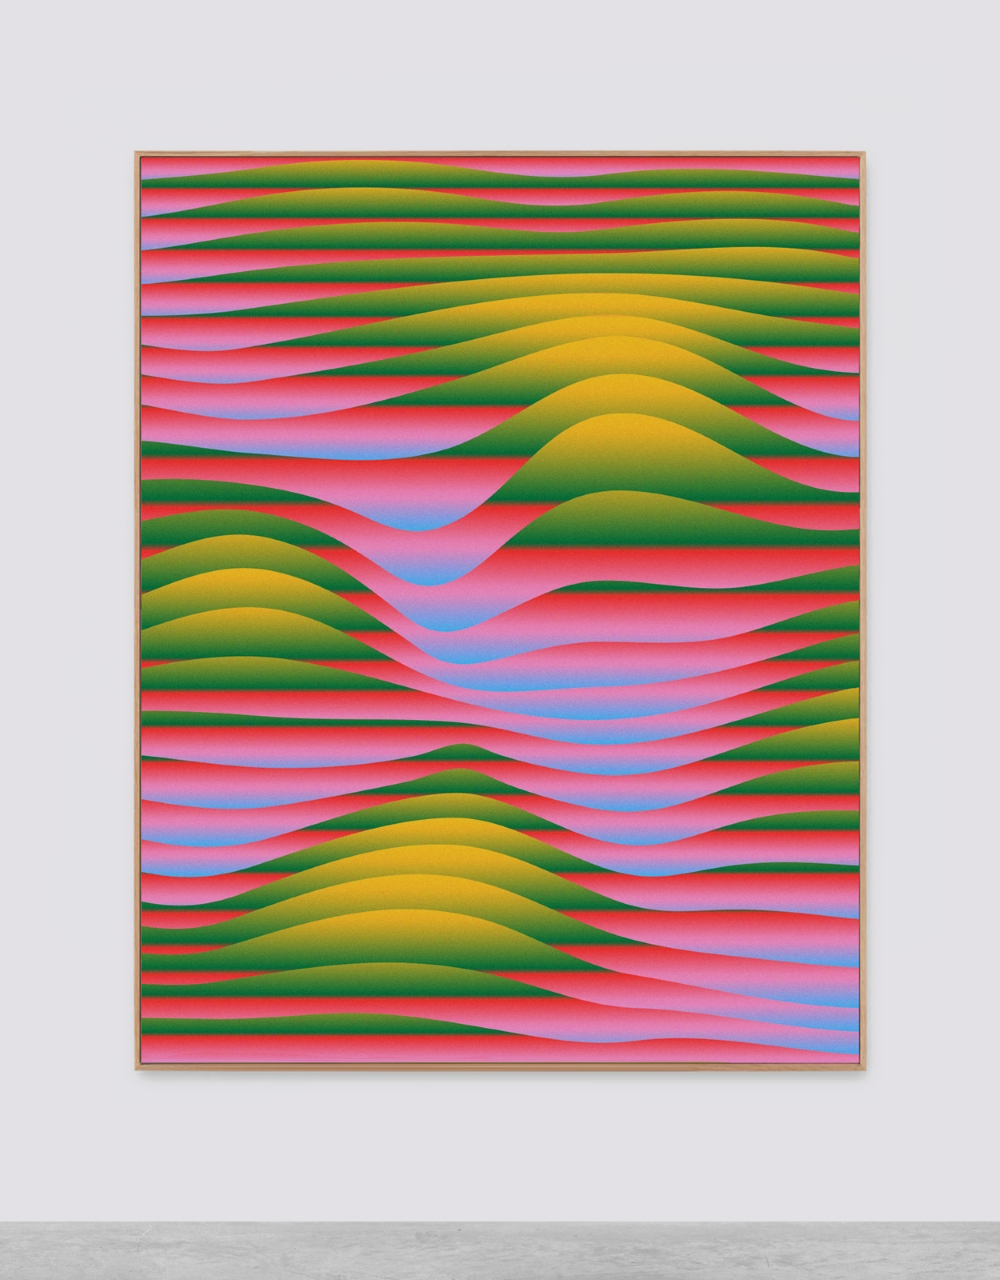 'Chromatic Waves': Giclée prints in size 40x50 cm of the project's limited edition (signed & numbered) are available via Mr.Mascha's shop on his website.